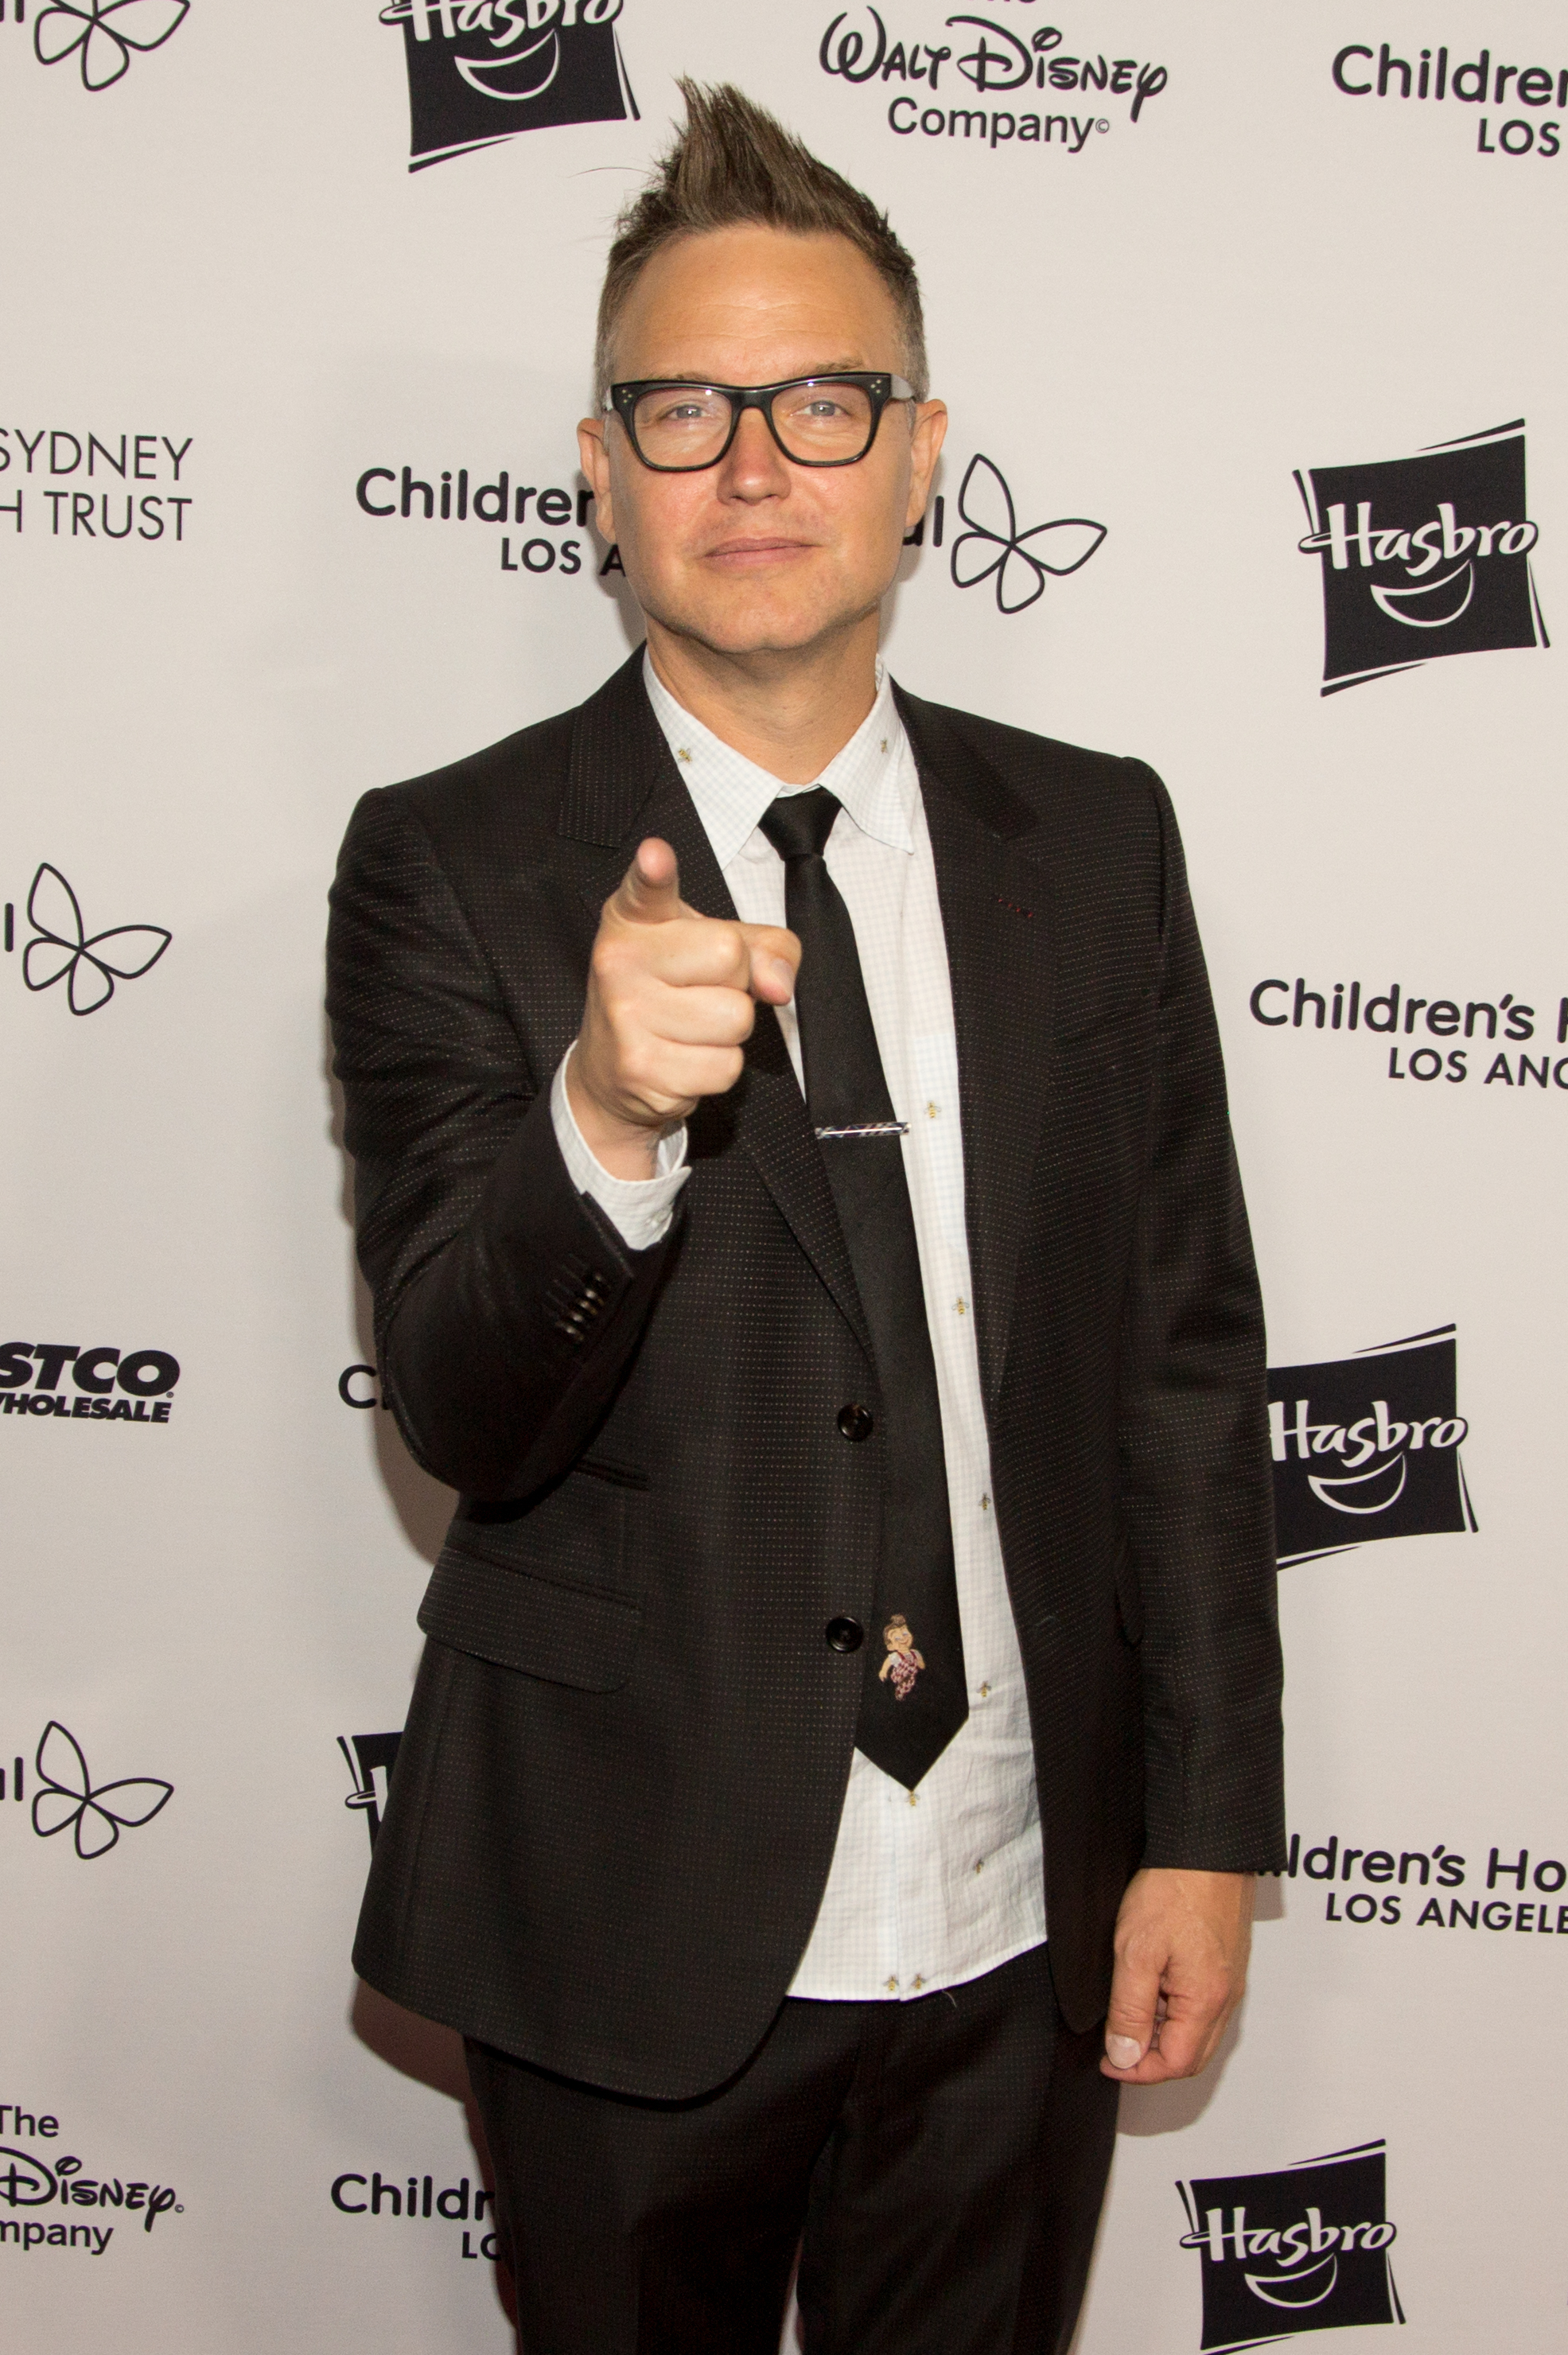 Mark Hoppus in a black suit with a patterned tie giving a thumbs-up at a charity event